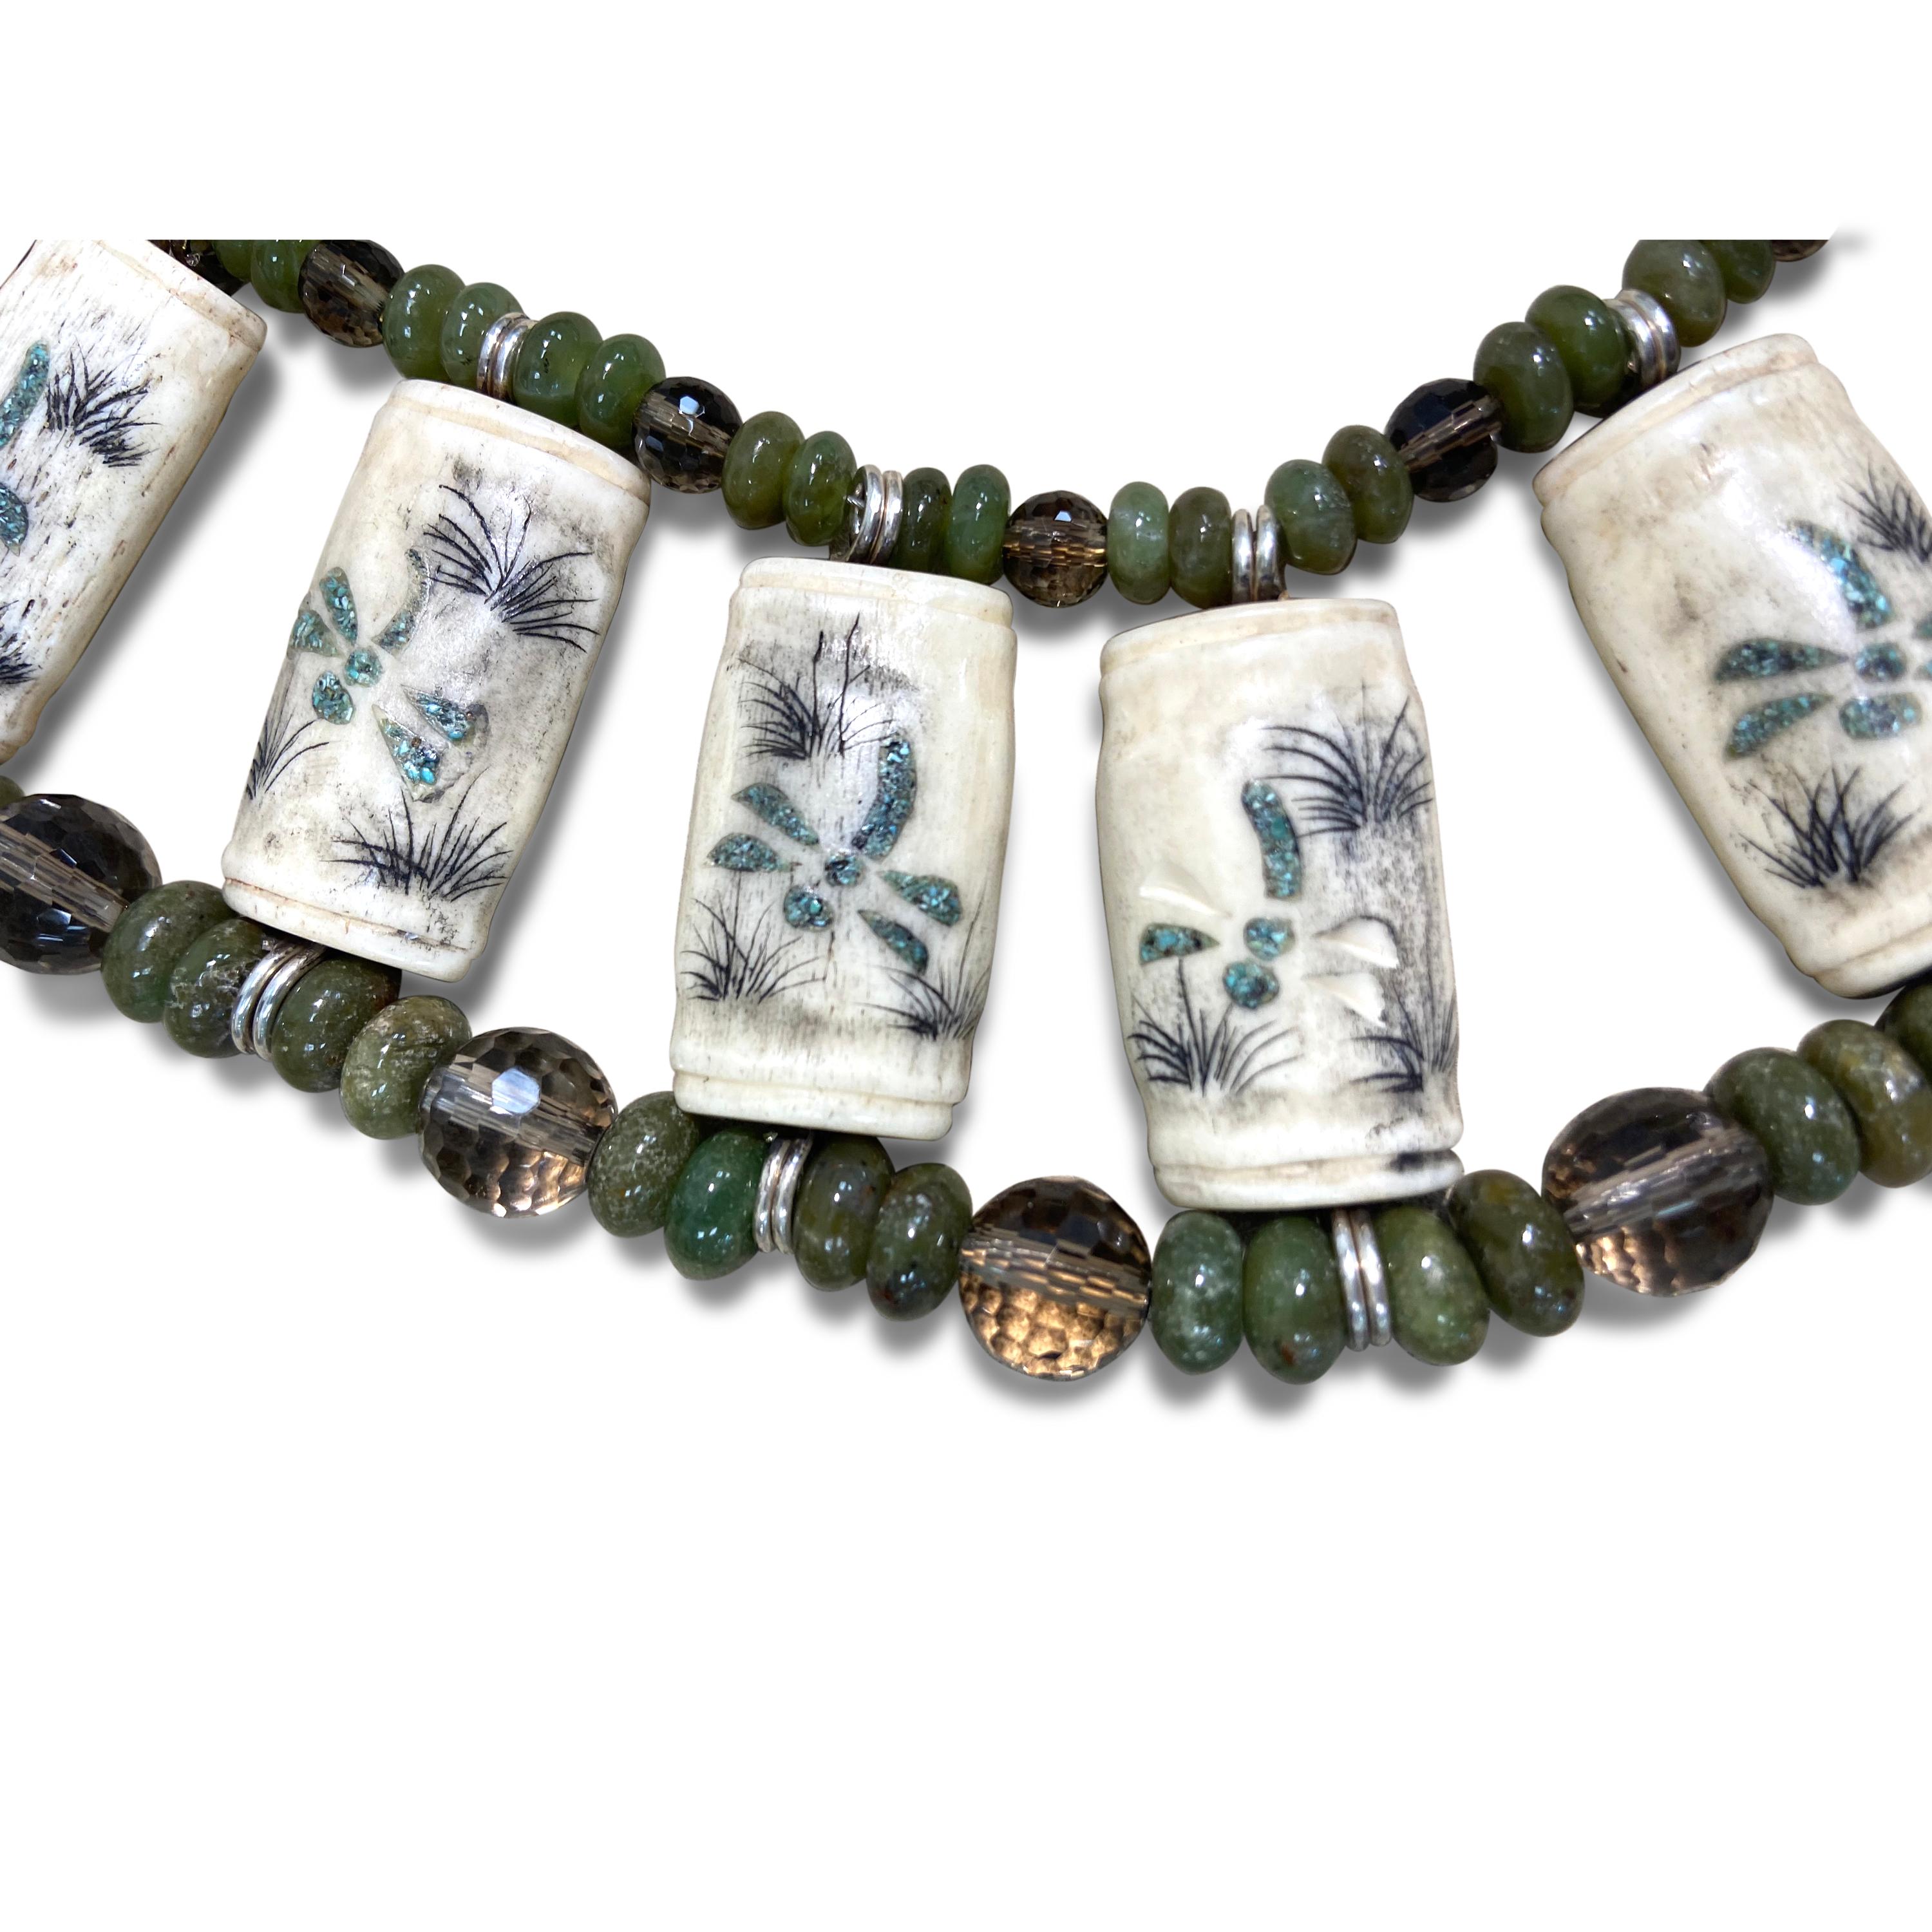 This Bone Mahjong Tile with Inlaid Turquoise Choker Necklace has the perfect allure to compliment any look! Bold, Unique, and Lively it’s a versatile piece that can be worn anywhere the from the home to a night out. This Bone Mahjong Tile with